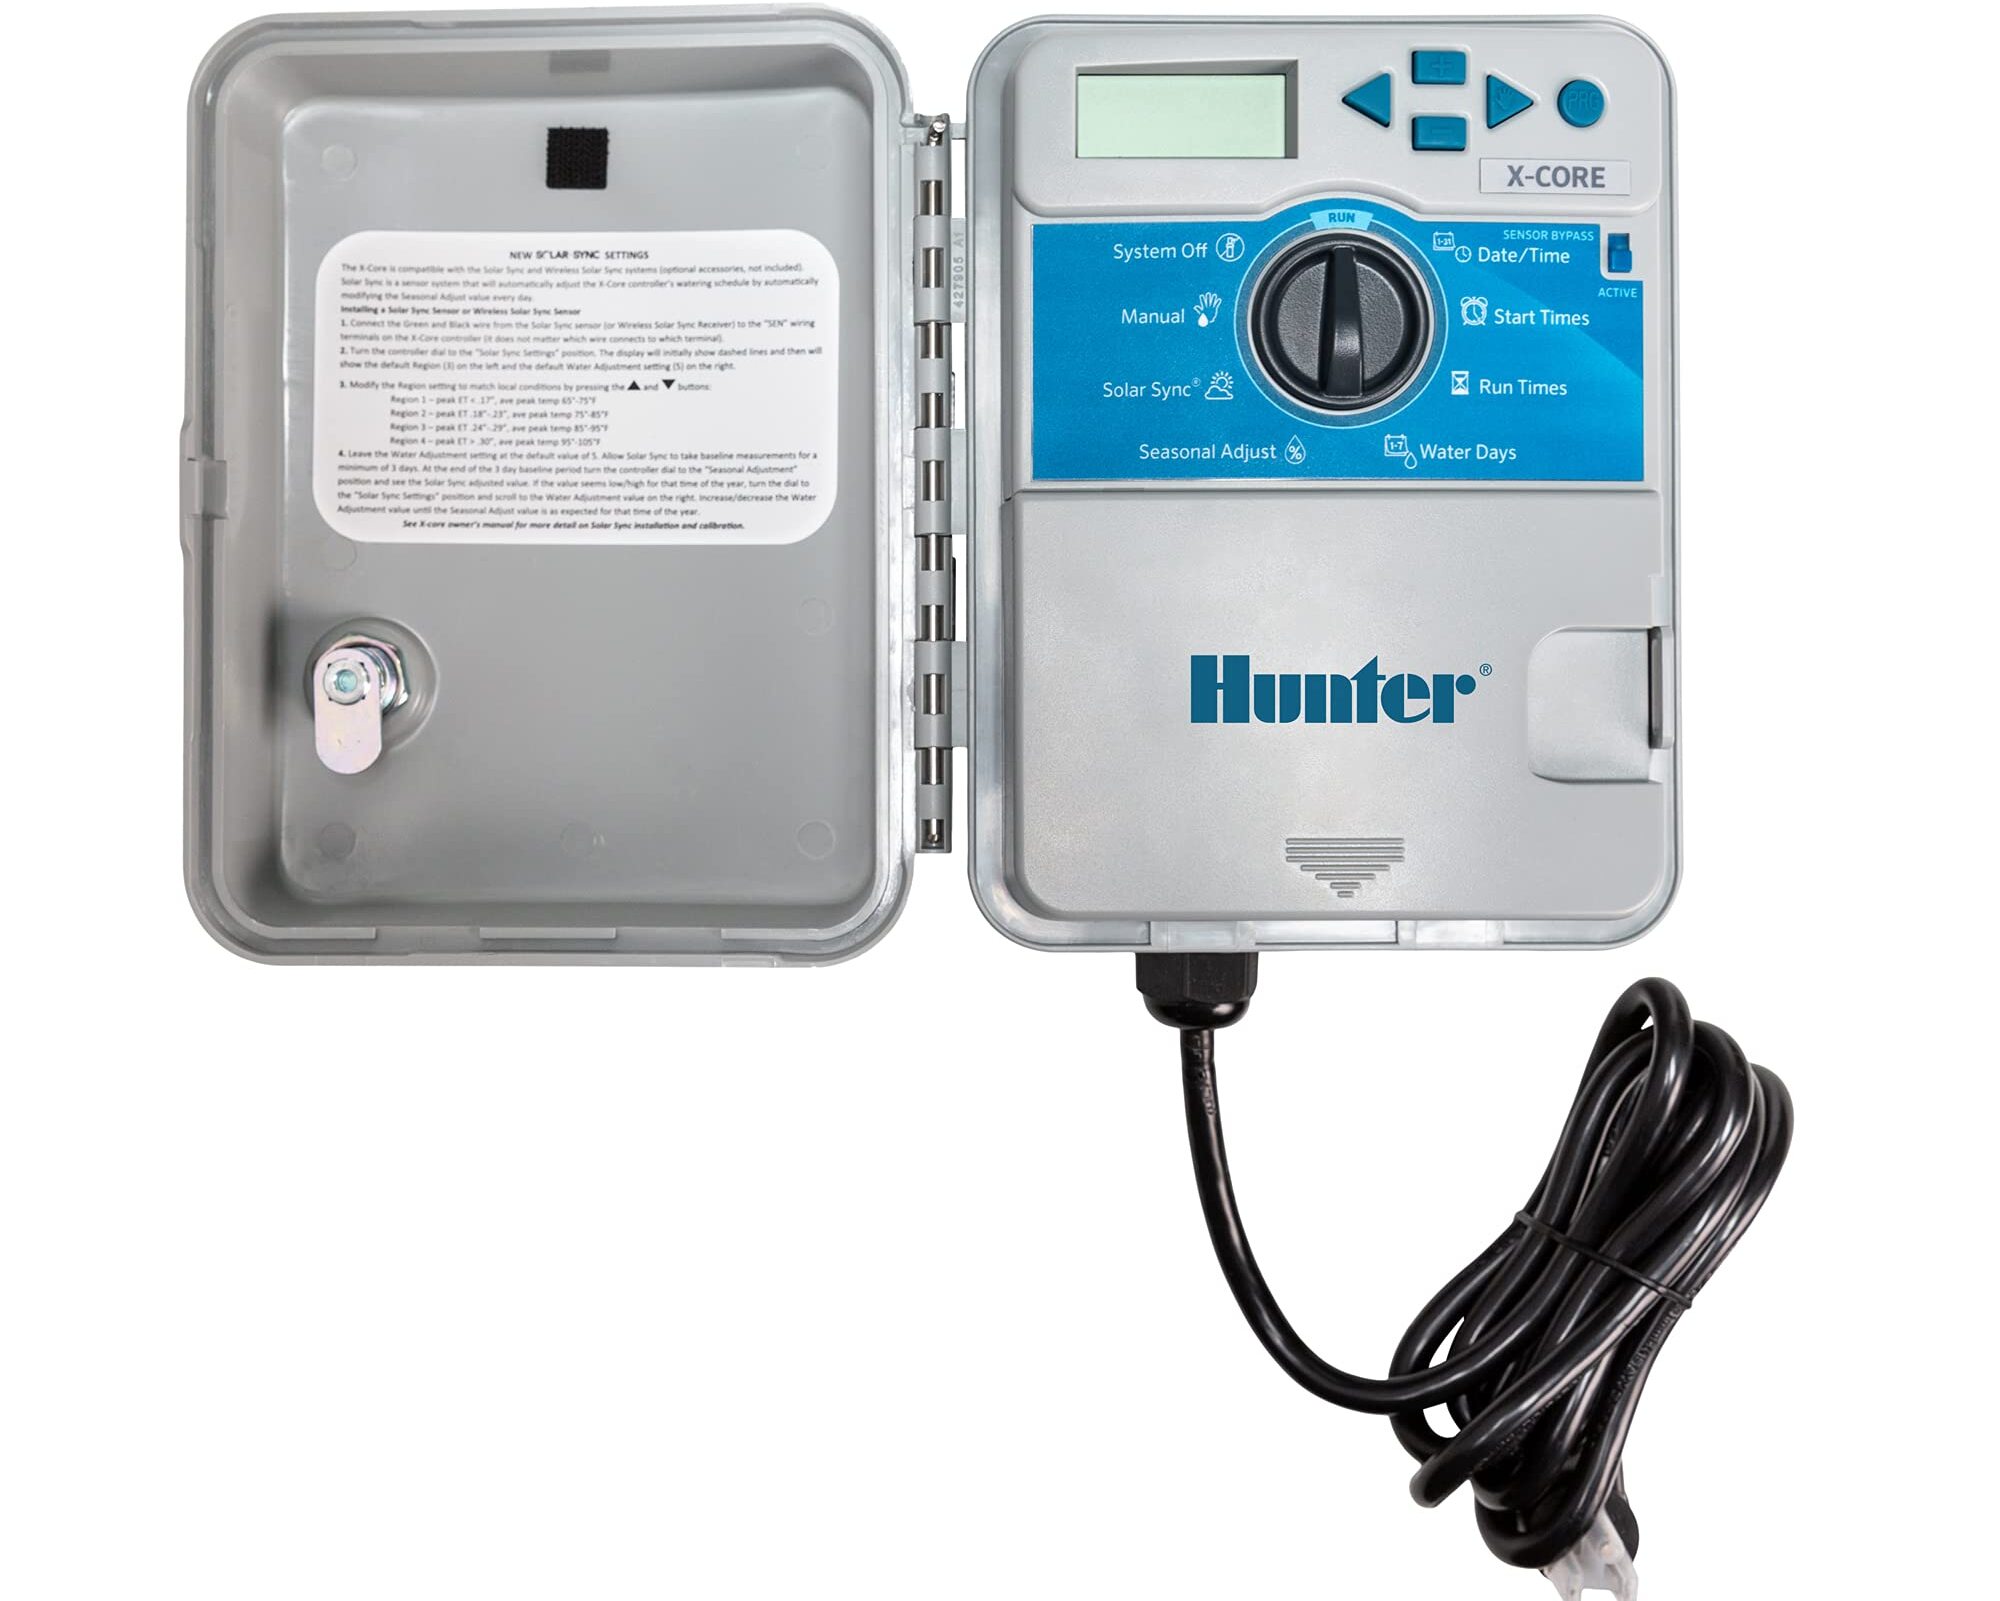 Where To Buy Hunter Irrigation Products